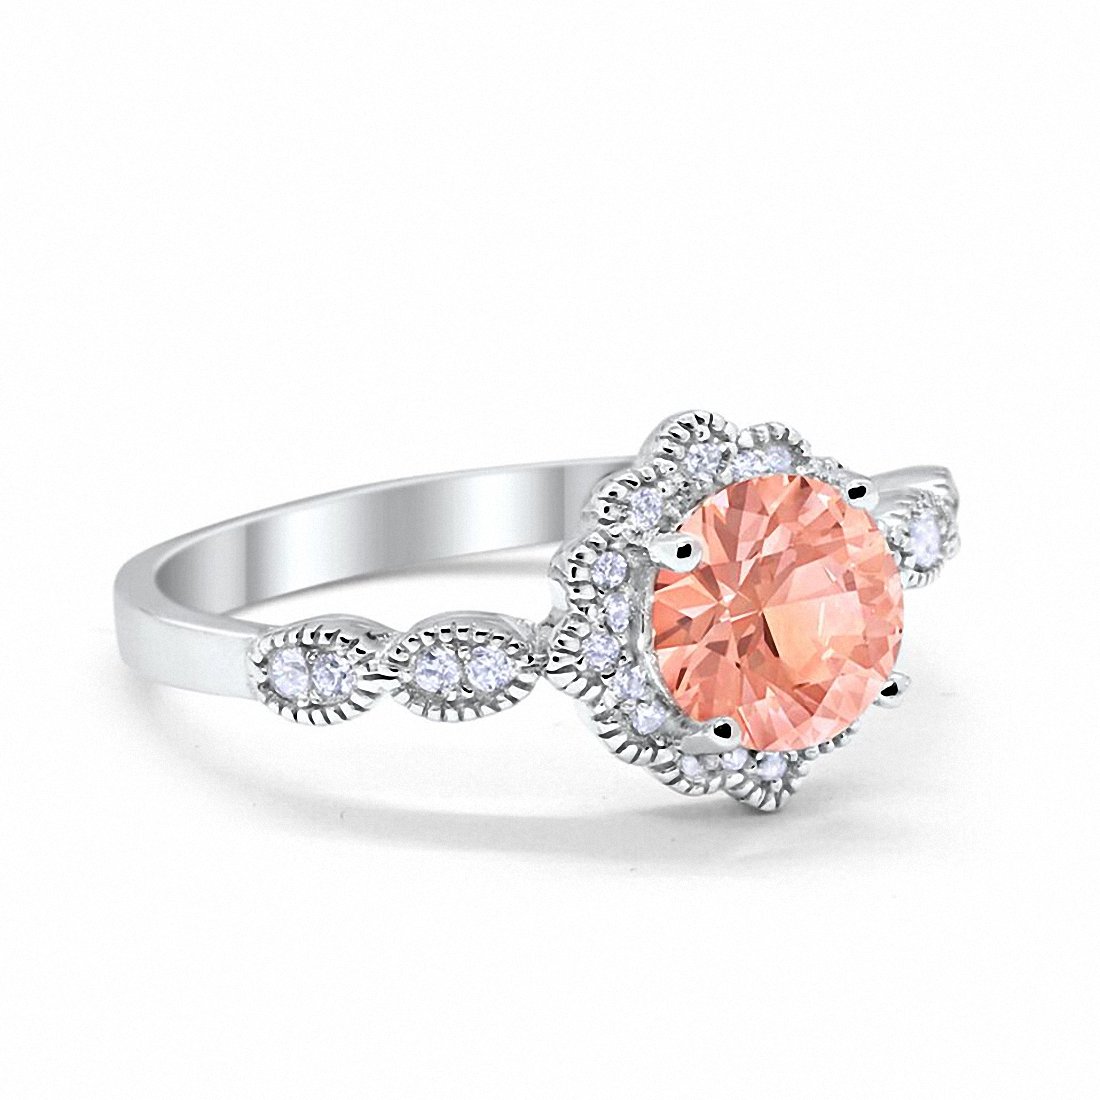 Floral Art Engagement Ring Simulated Morganite Cubic Zirconia 925 Sterling Silver